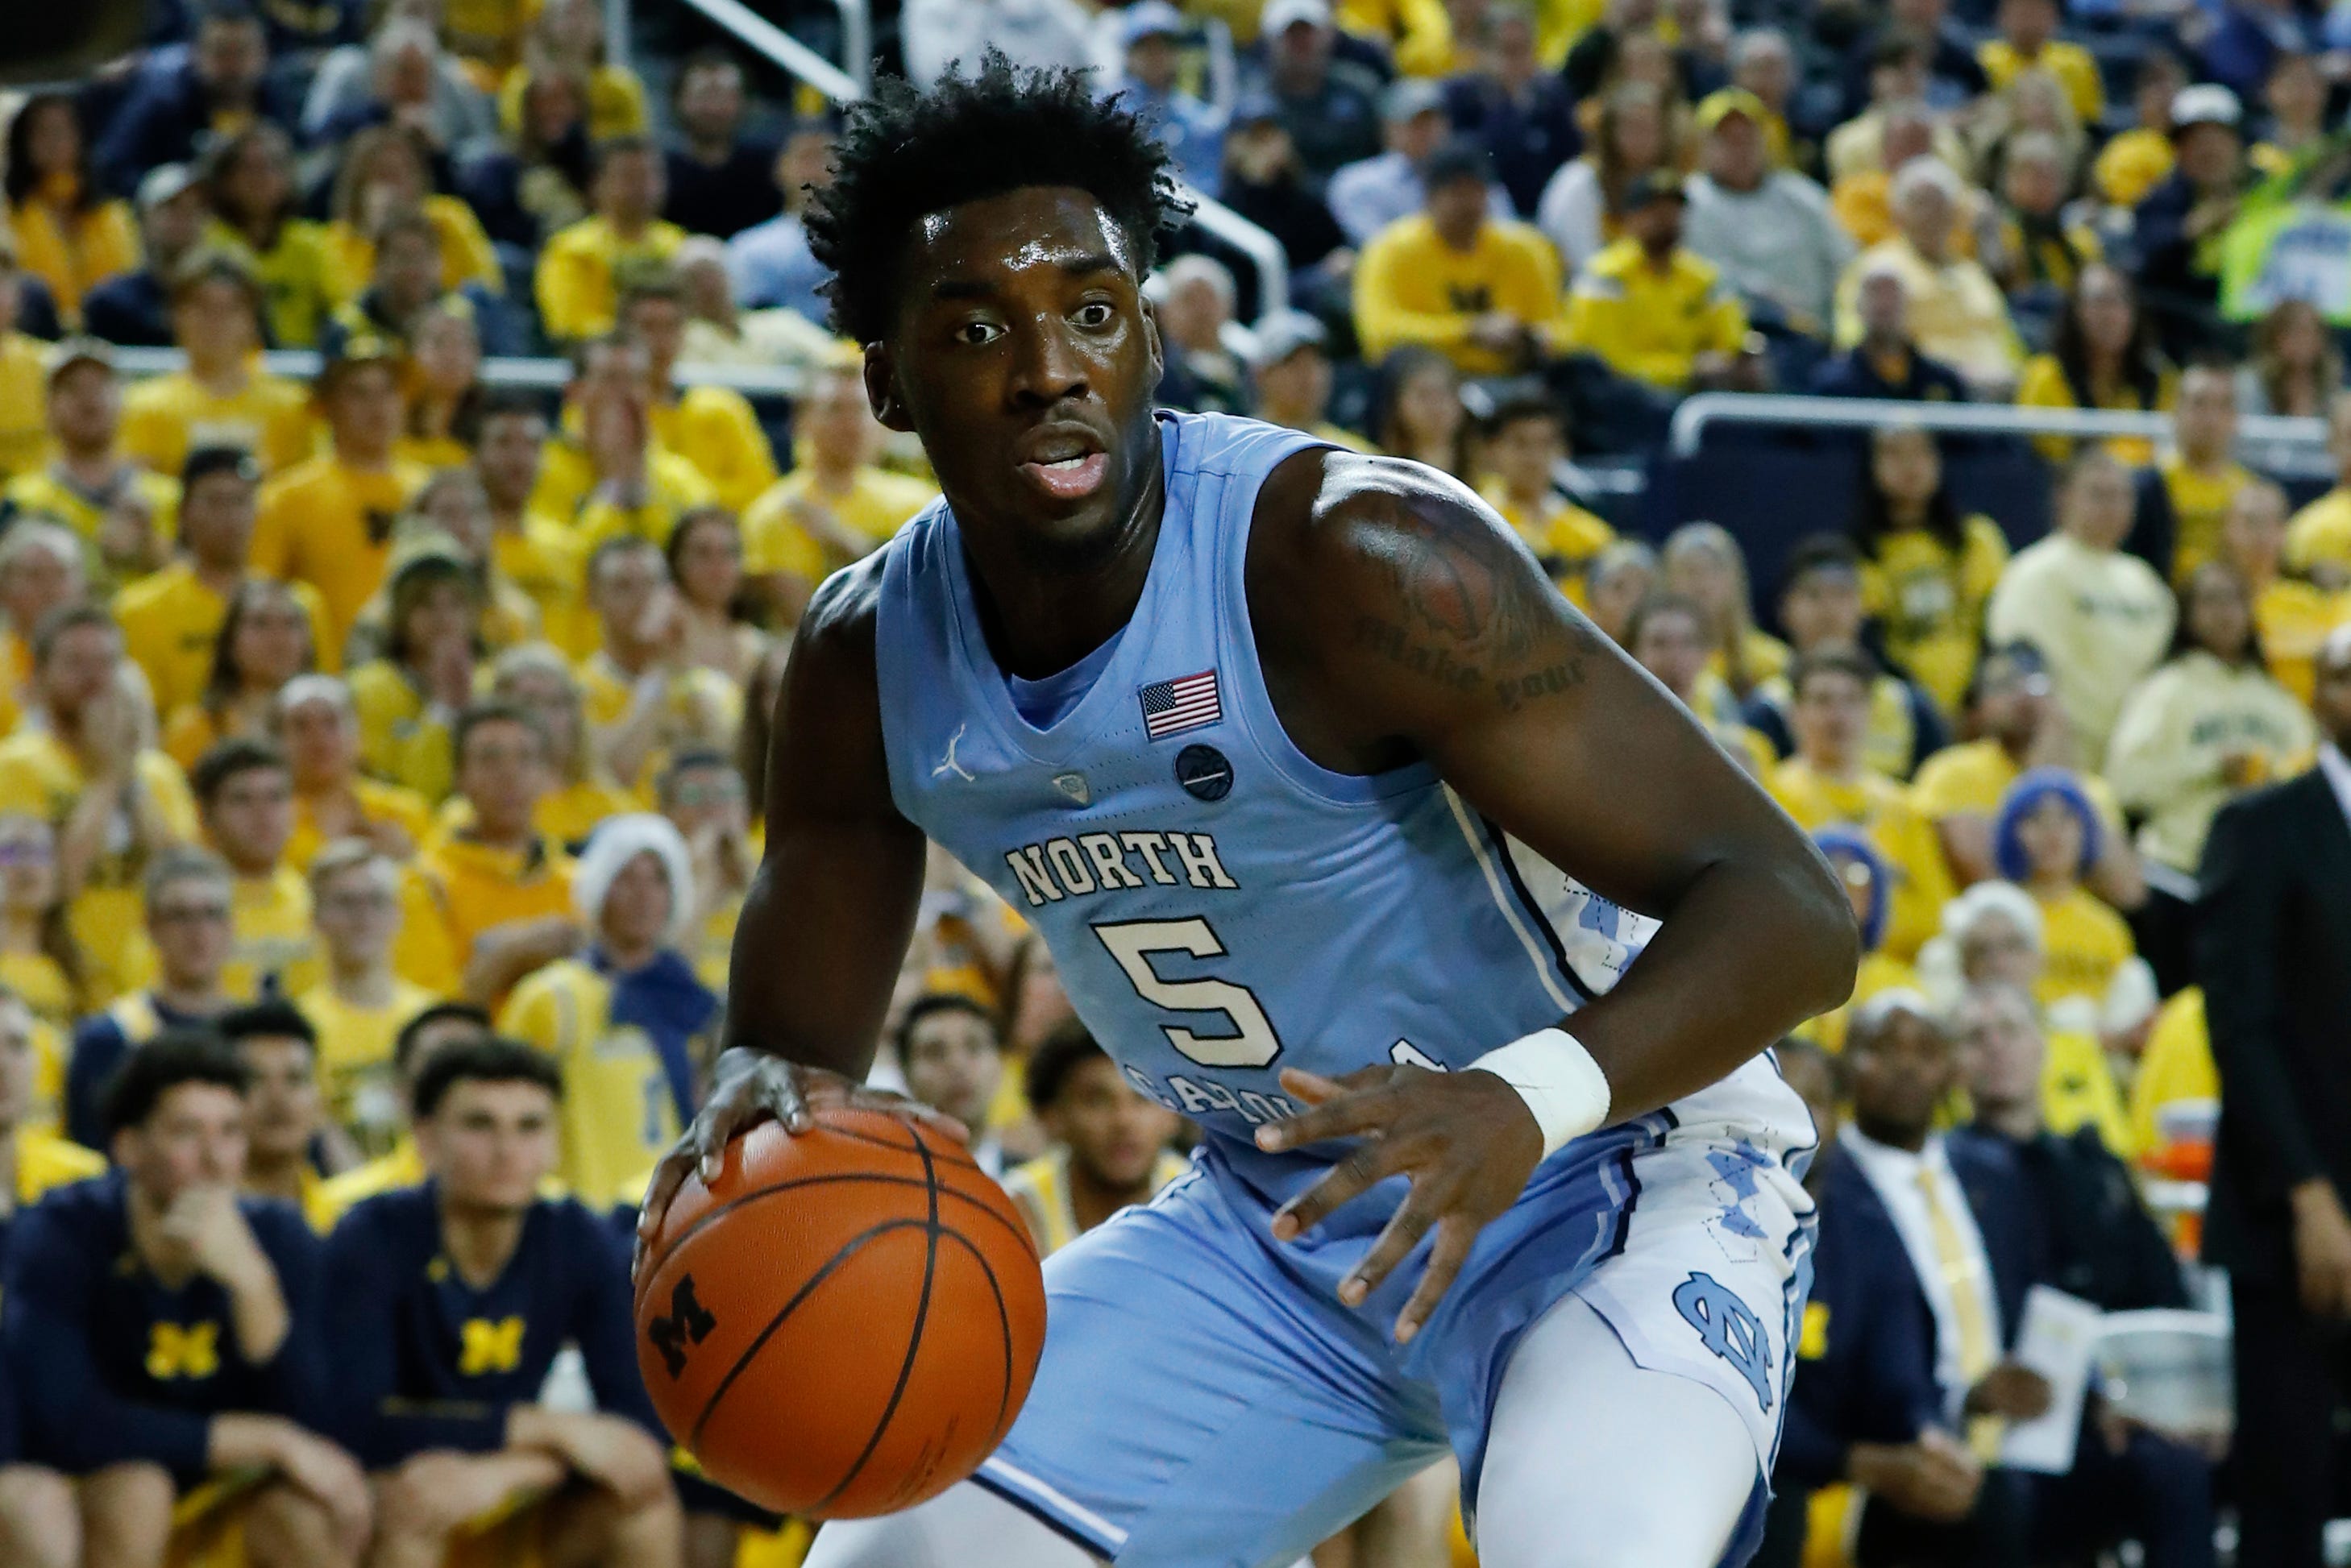 13. Miami Heat: Nassir Little, wing, North Carolina. Little isn’t a prolific scorer and at 6-6, he isn’t imposing, but he brings some acumen on the defensive end, aided by a 7-foot-1 wingspan. The Heat will look at other wings in this range, but Little could be most balanced and skilled on both ends.